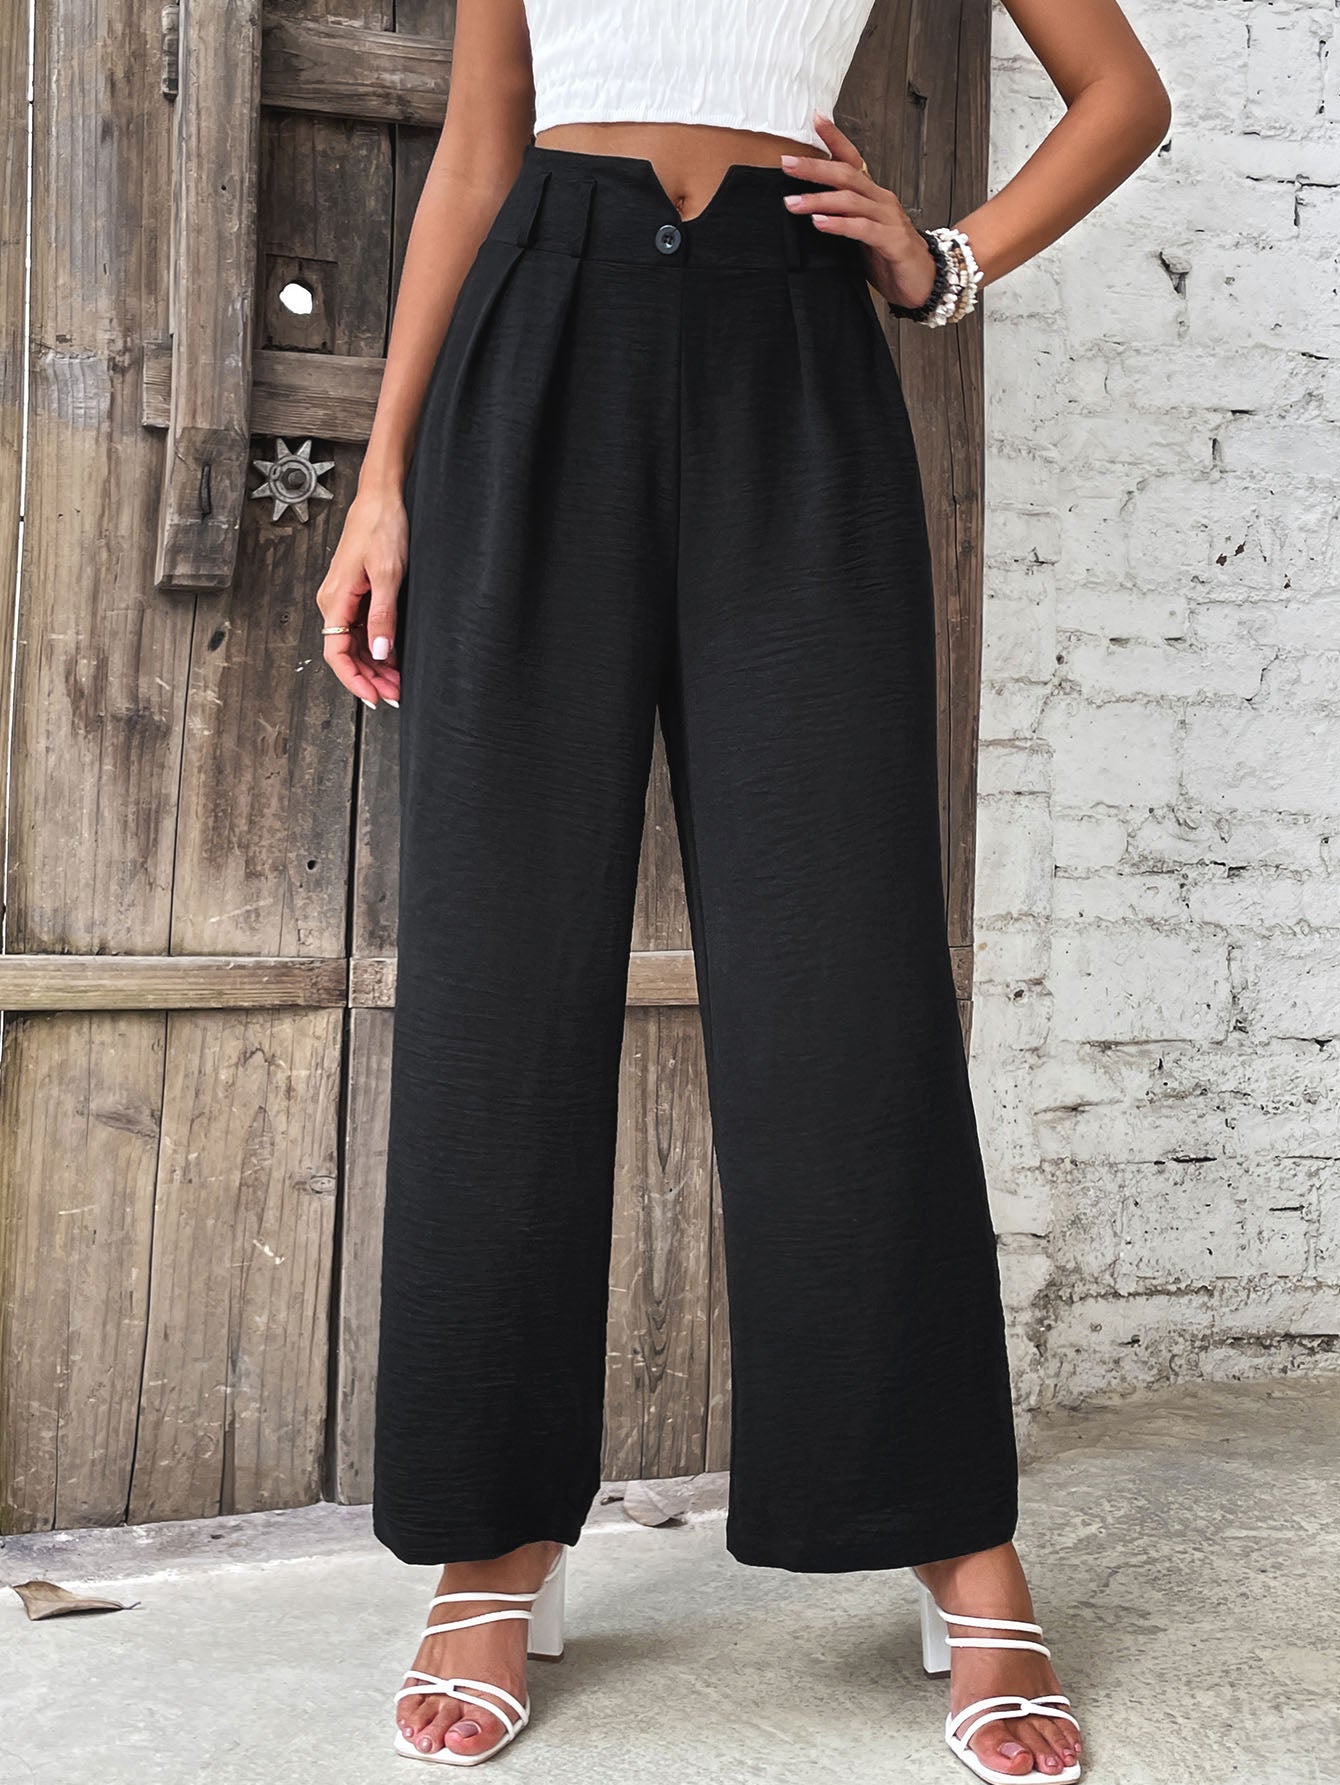 INSPRIRE ME Ruched High Waist Straight Leg Pants